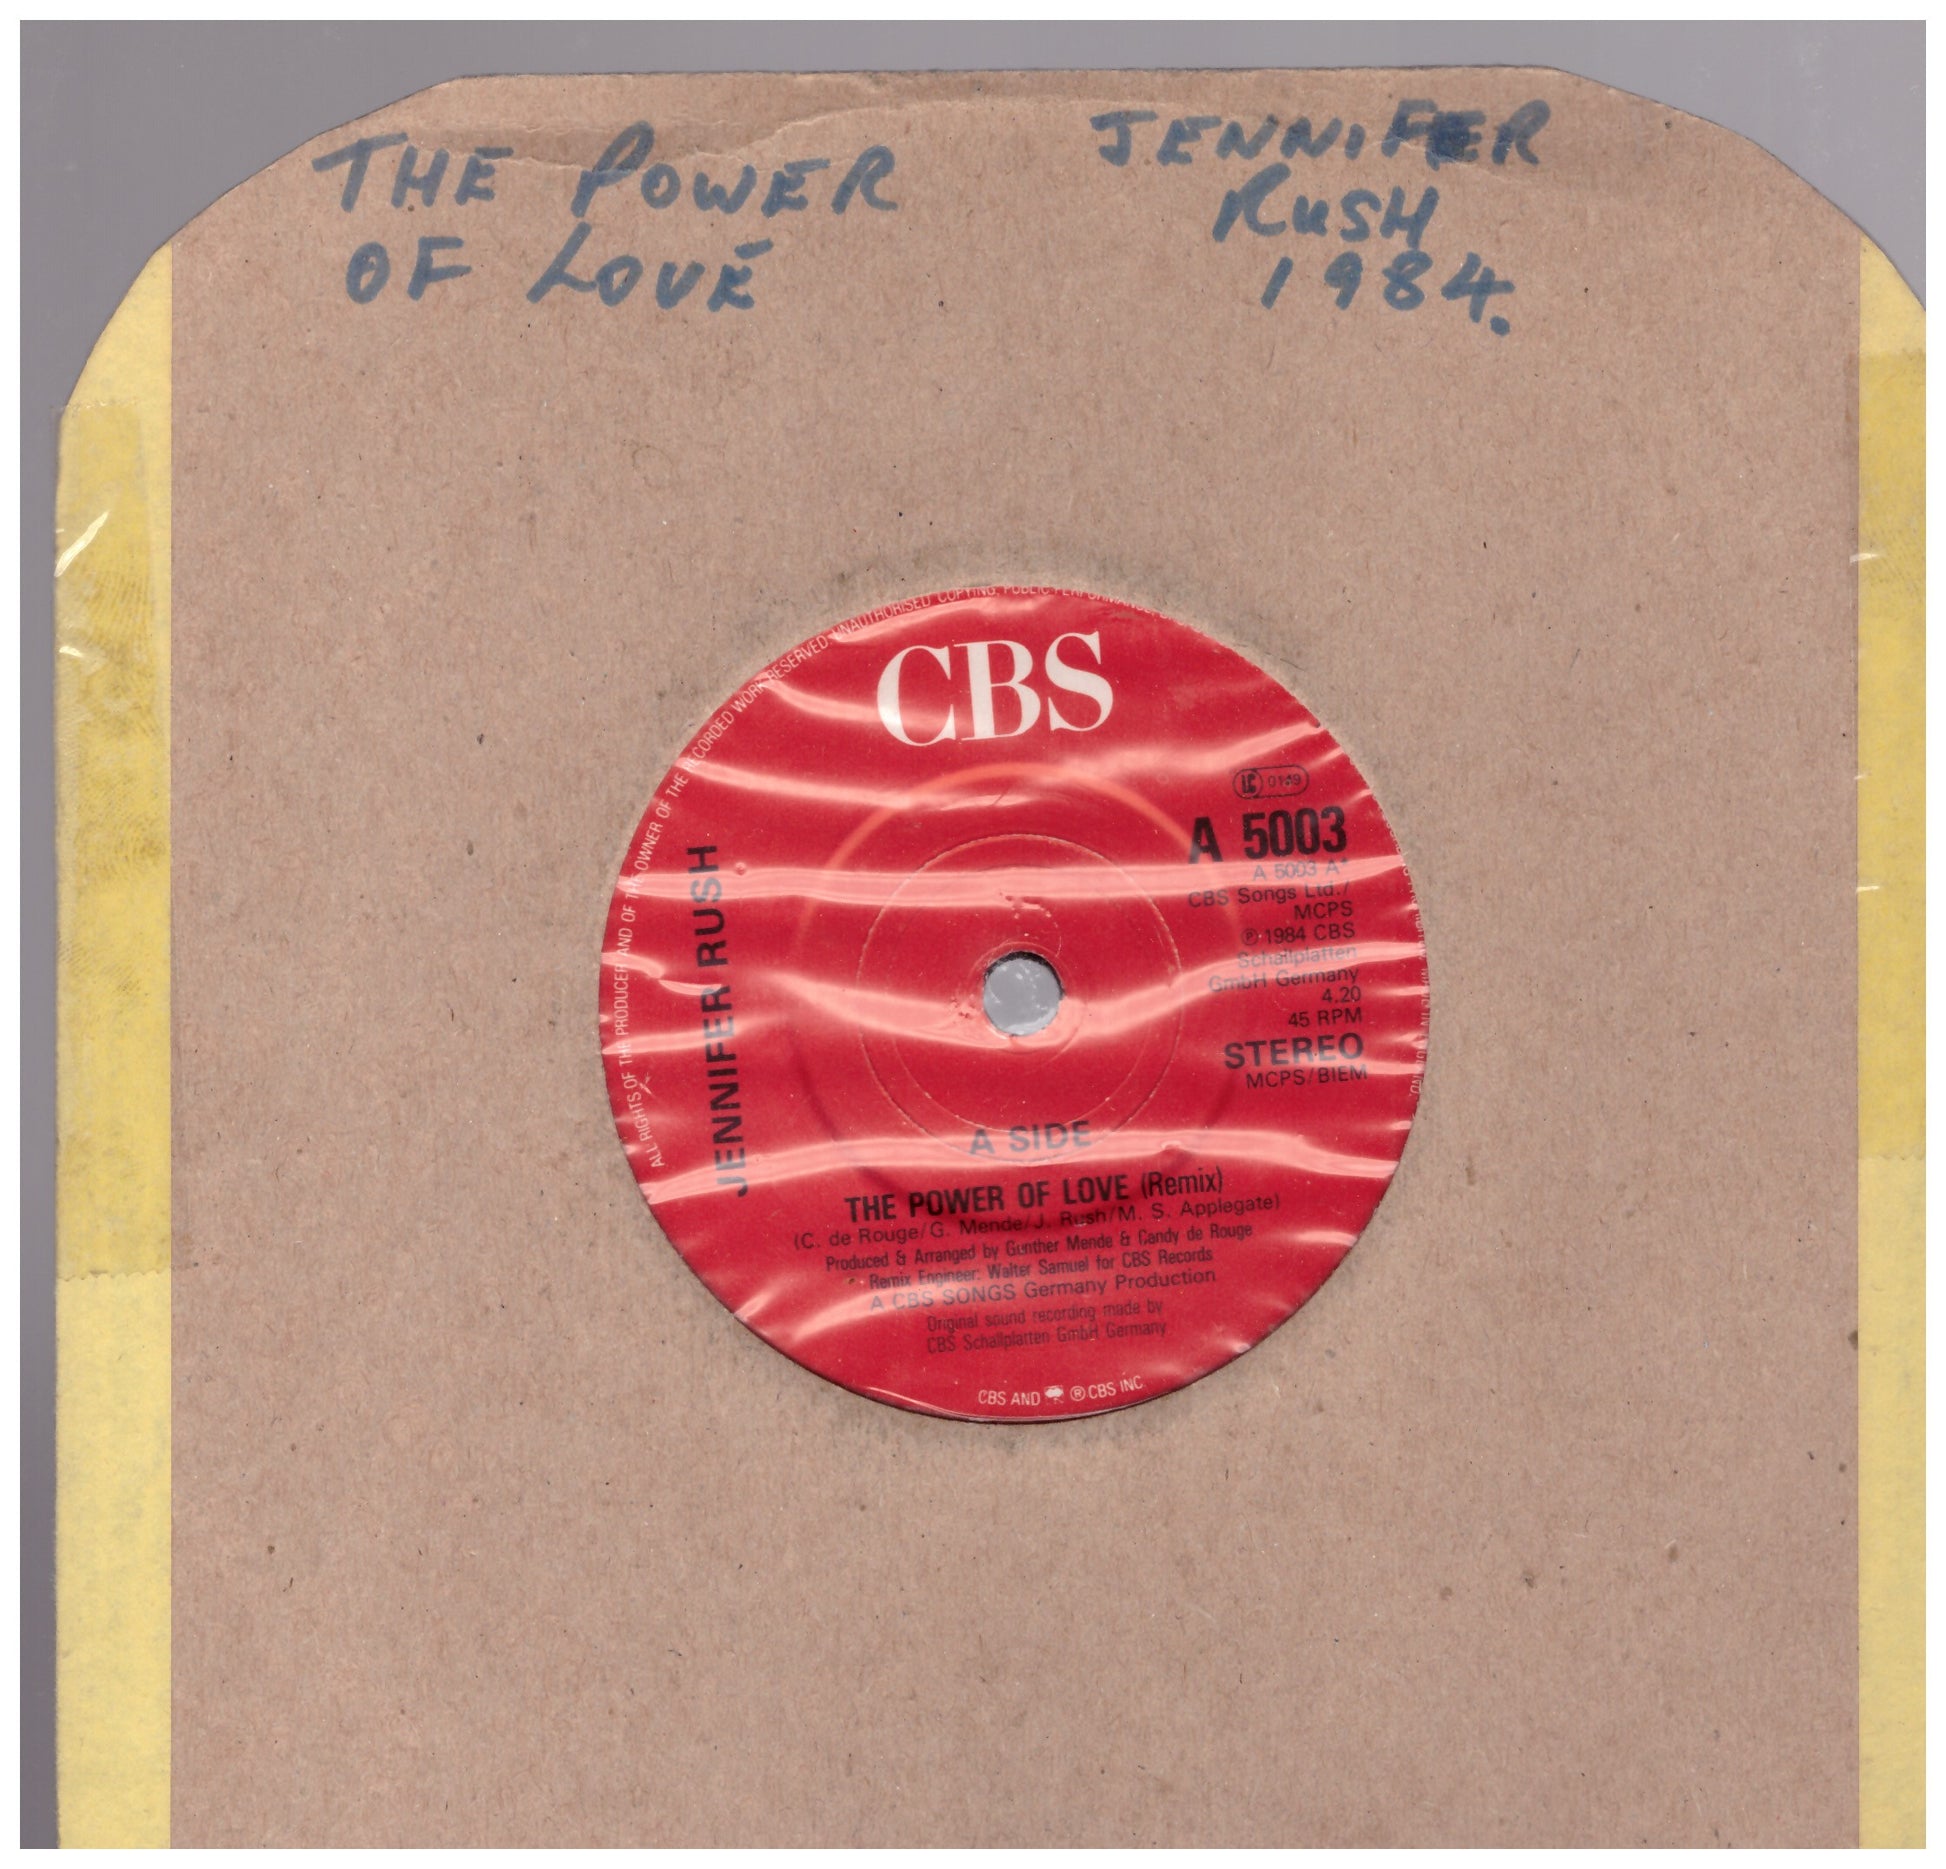 The Power Of Love (Remix) by Jennifer Rush from CBS (A 5003)